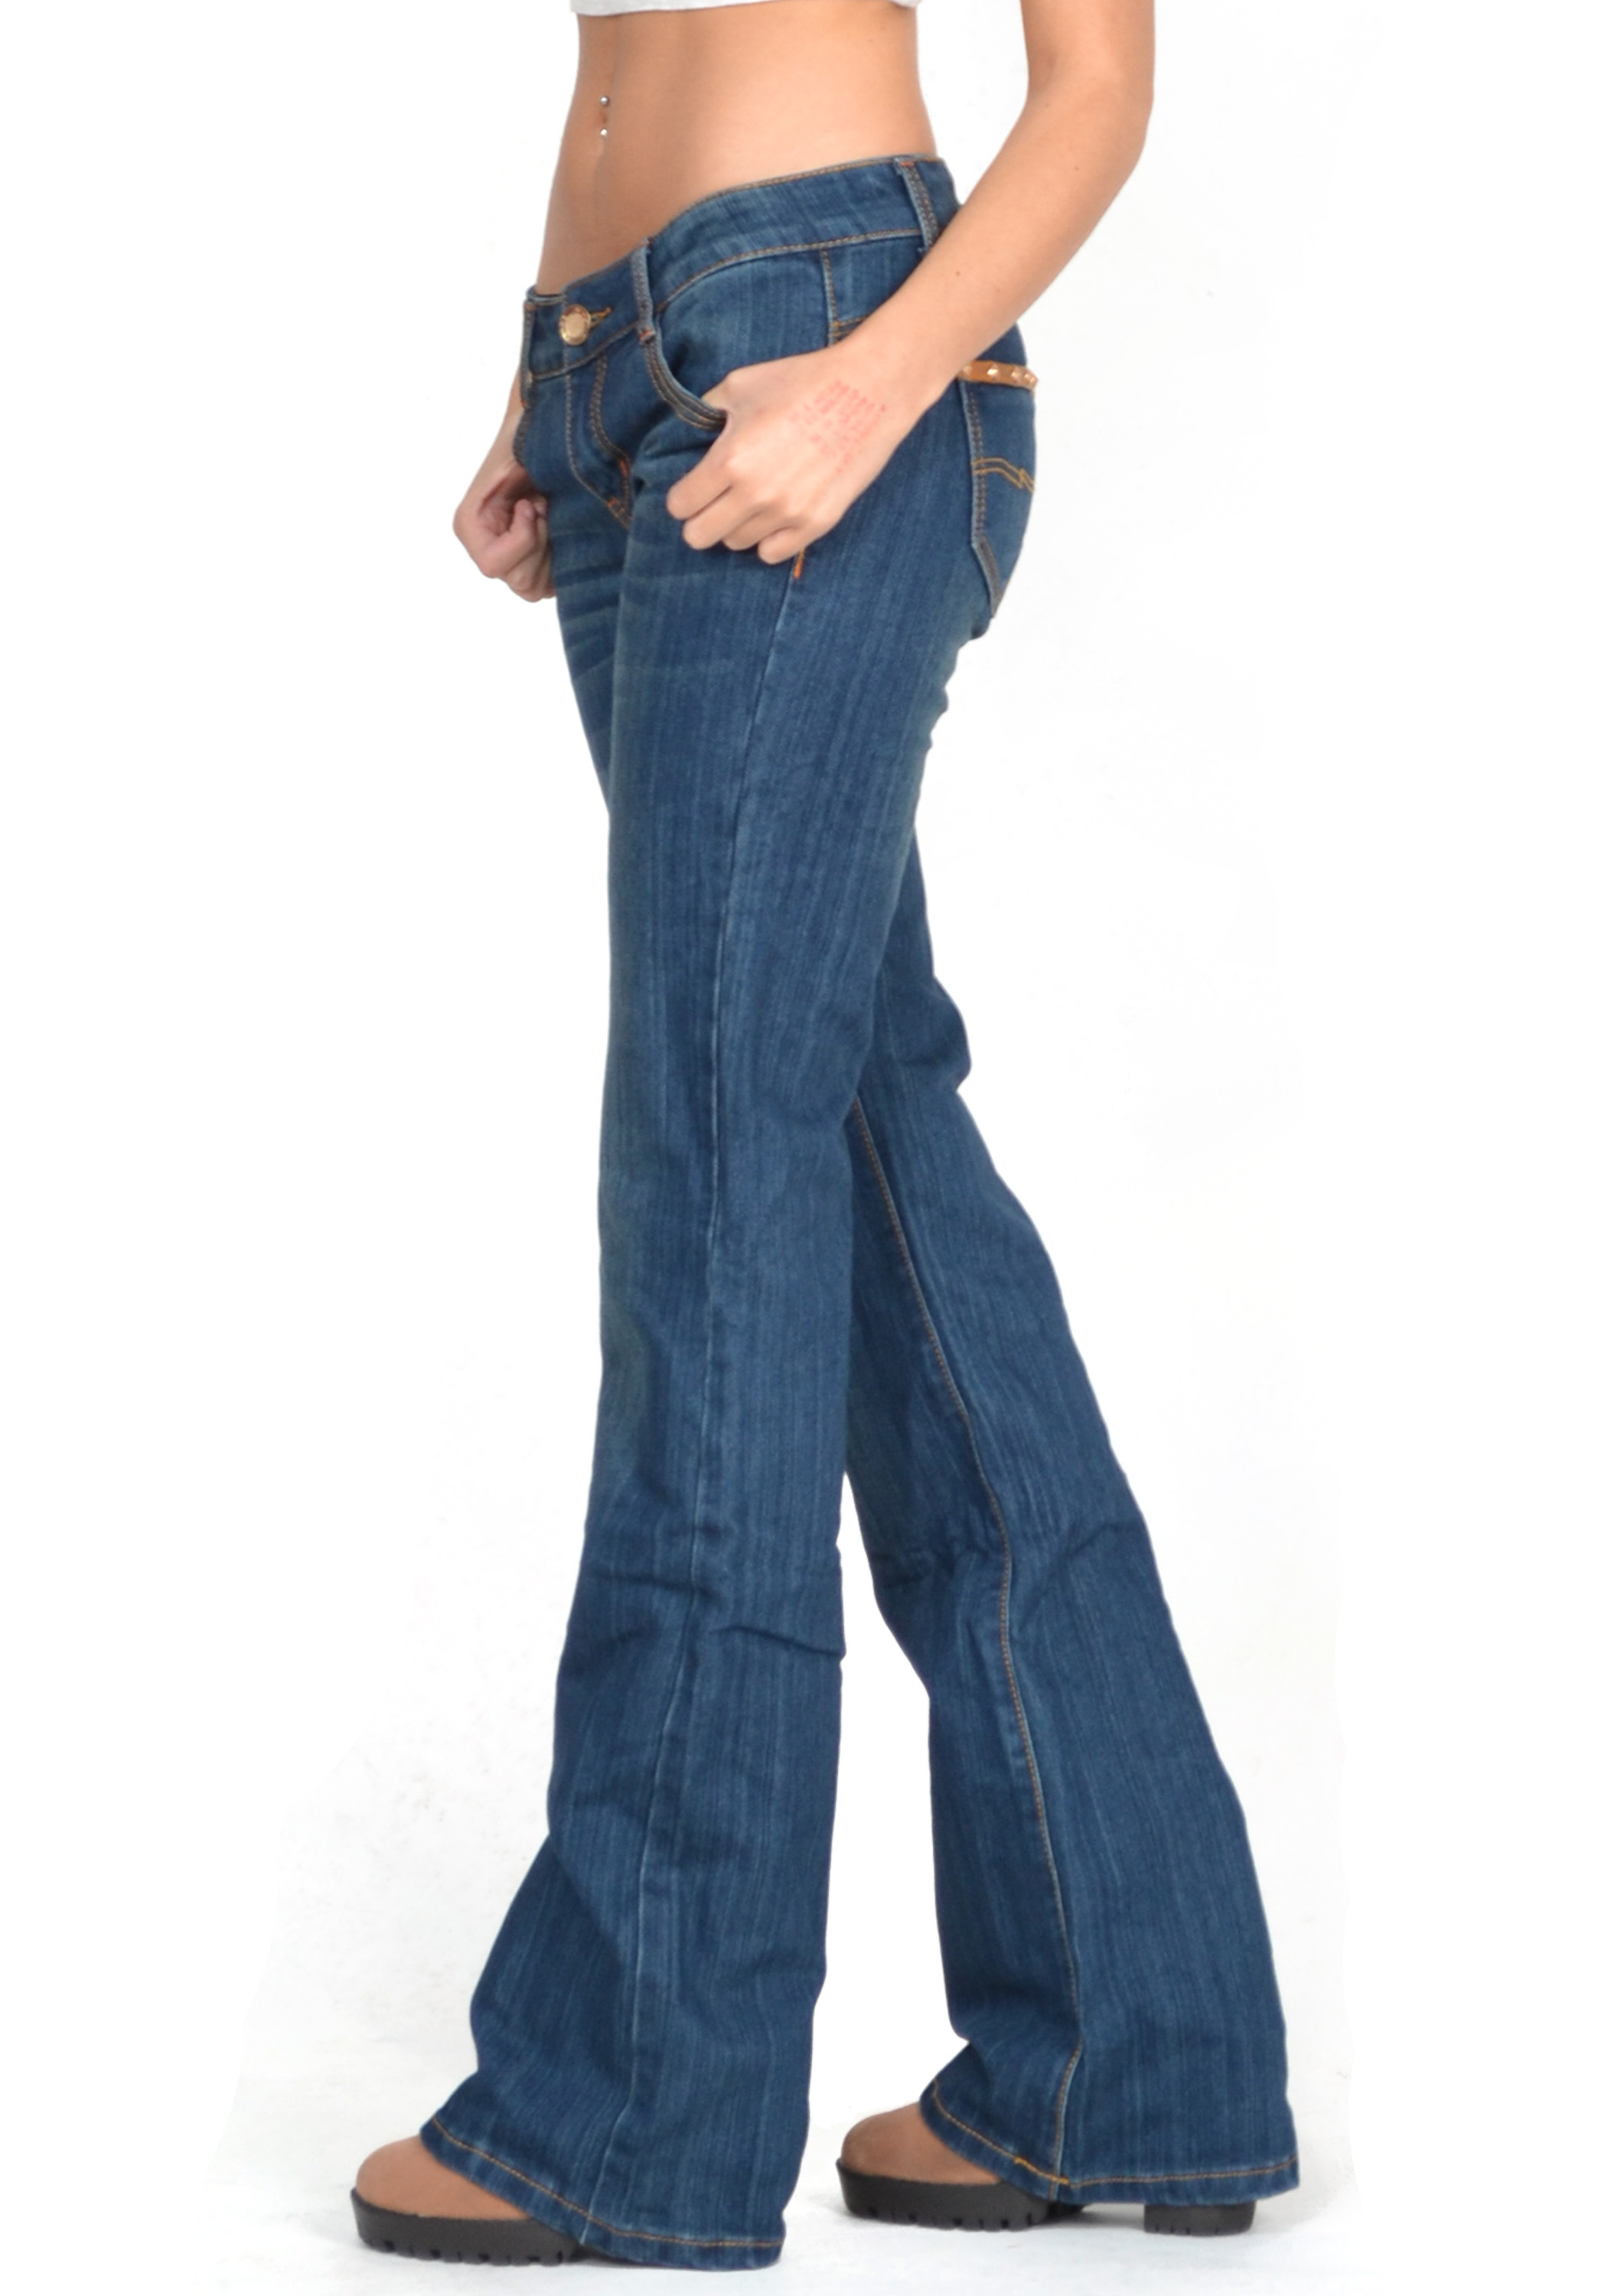 New Womens Hipster Low Rise Bootcut Flared Jeans Blue Bellbottom Denim Flares Ebay